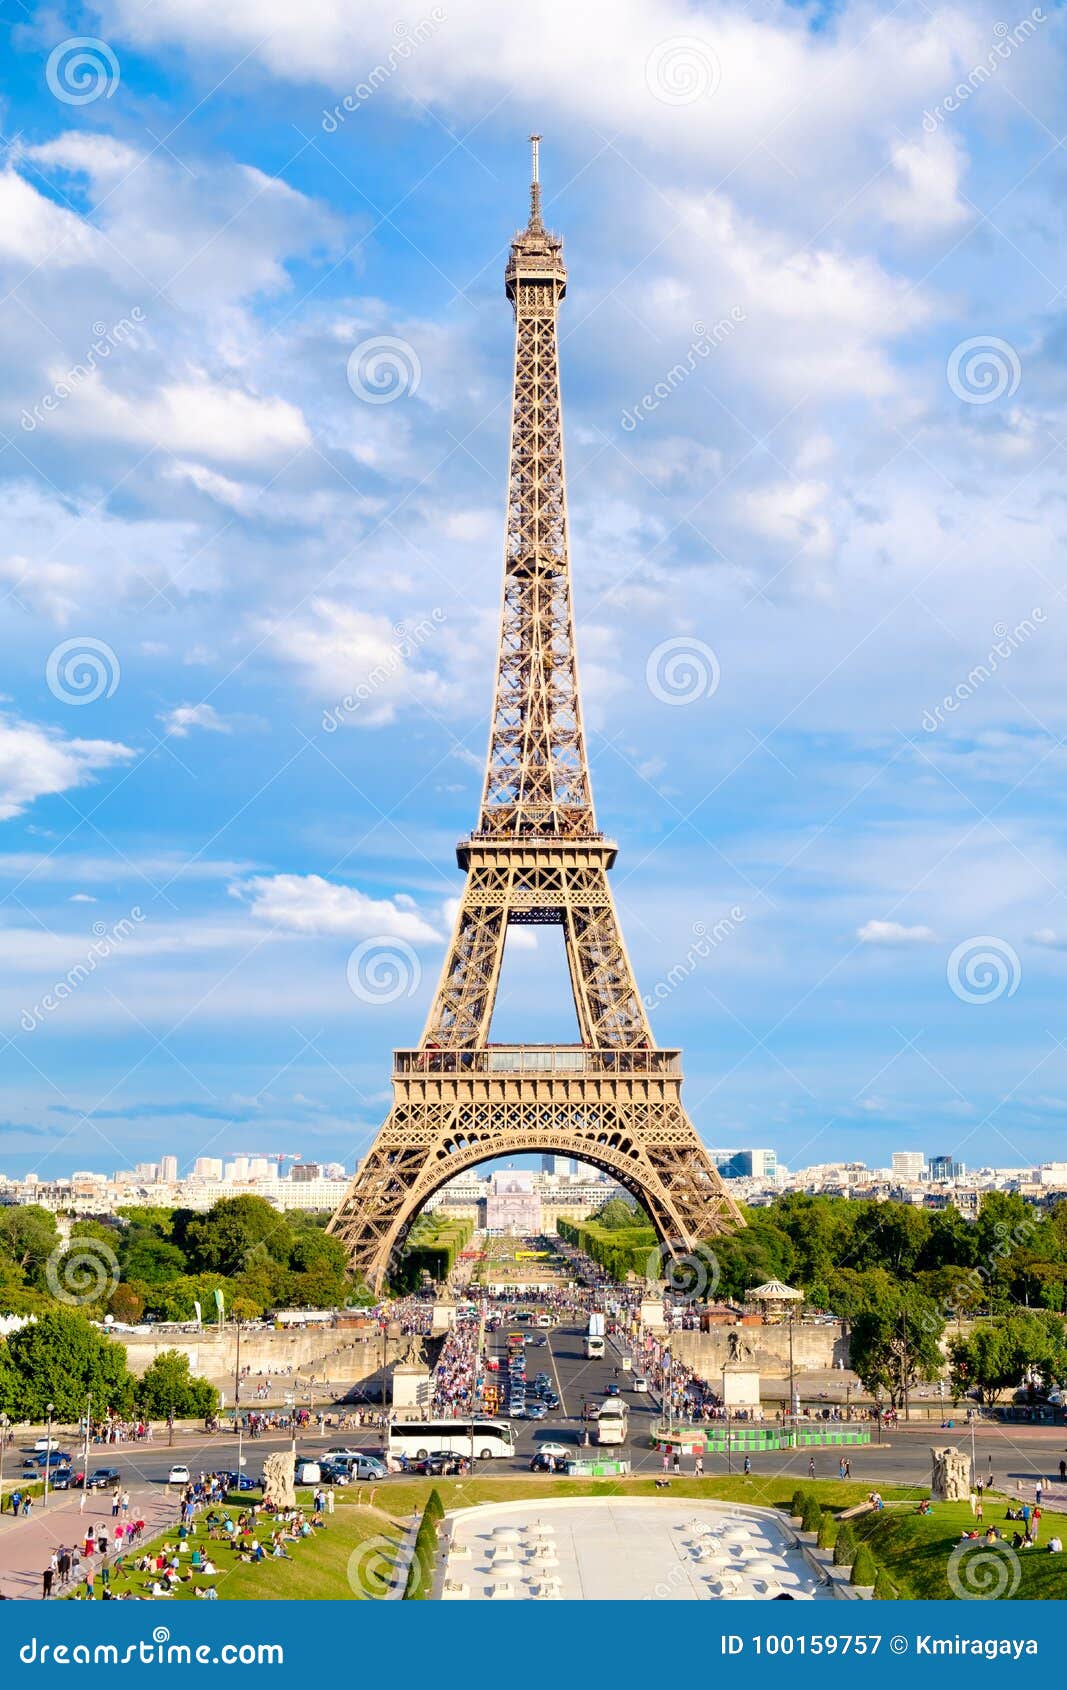 The Eiffel Tower On A Beautiful Day In Paris Stock Image Image Of History Holiday 100159757